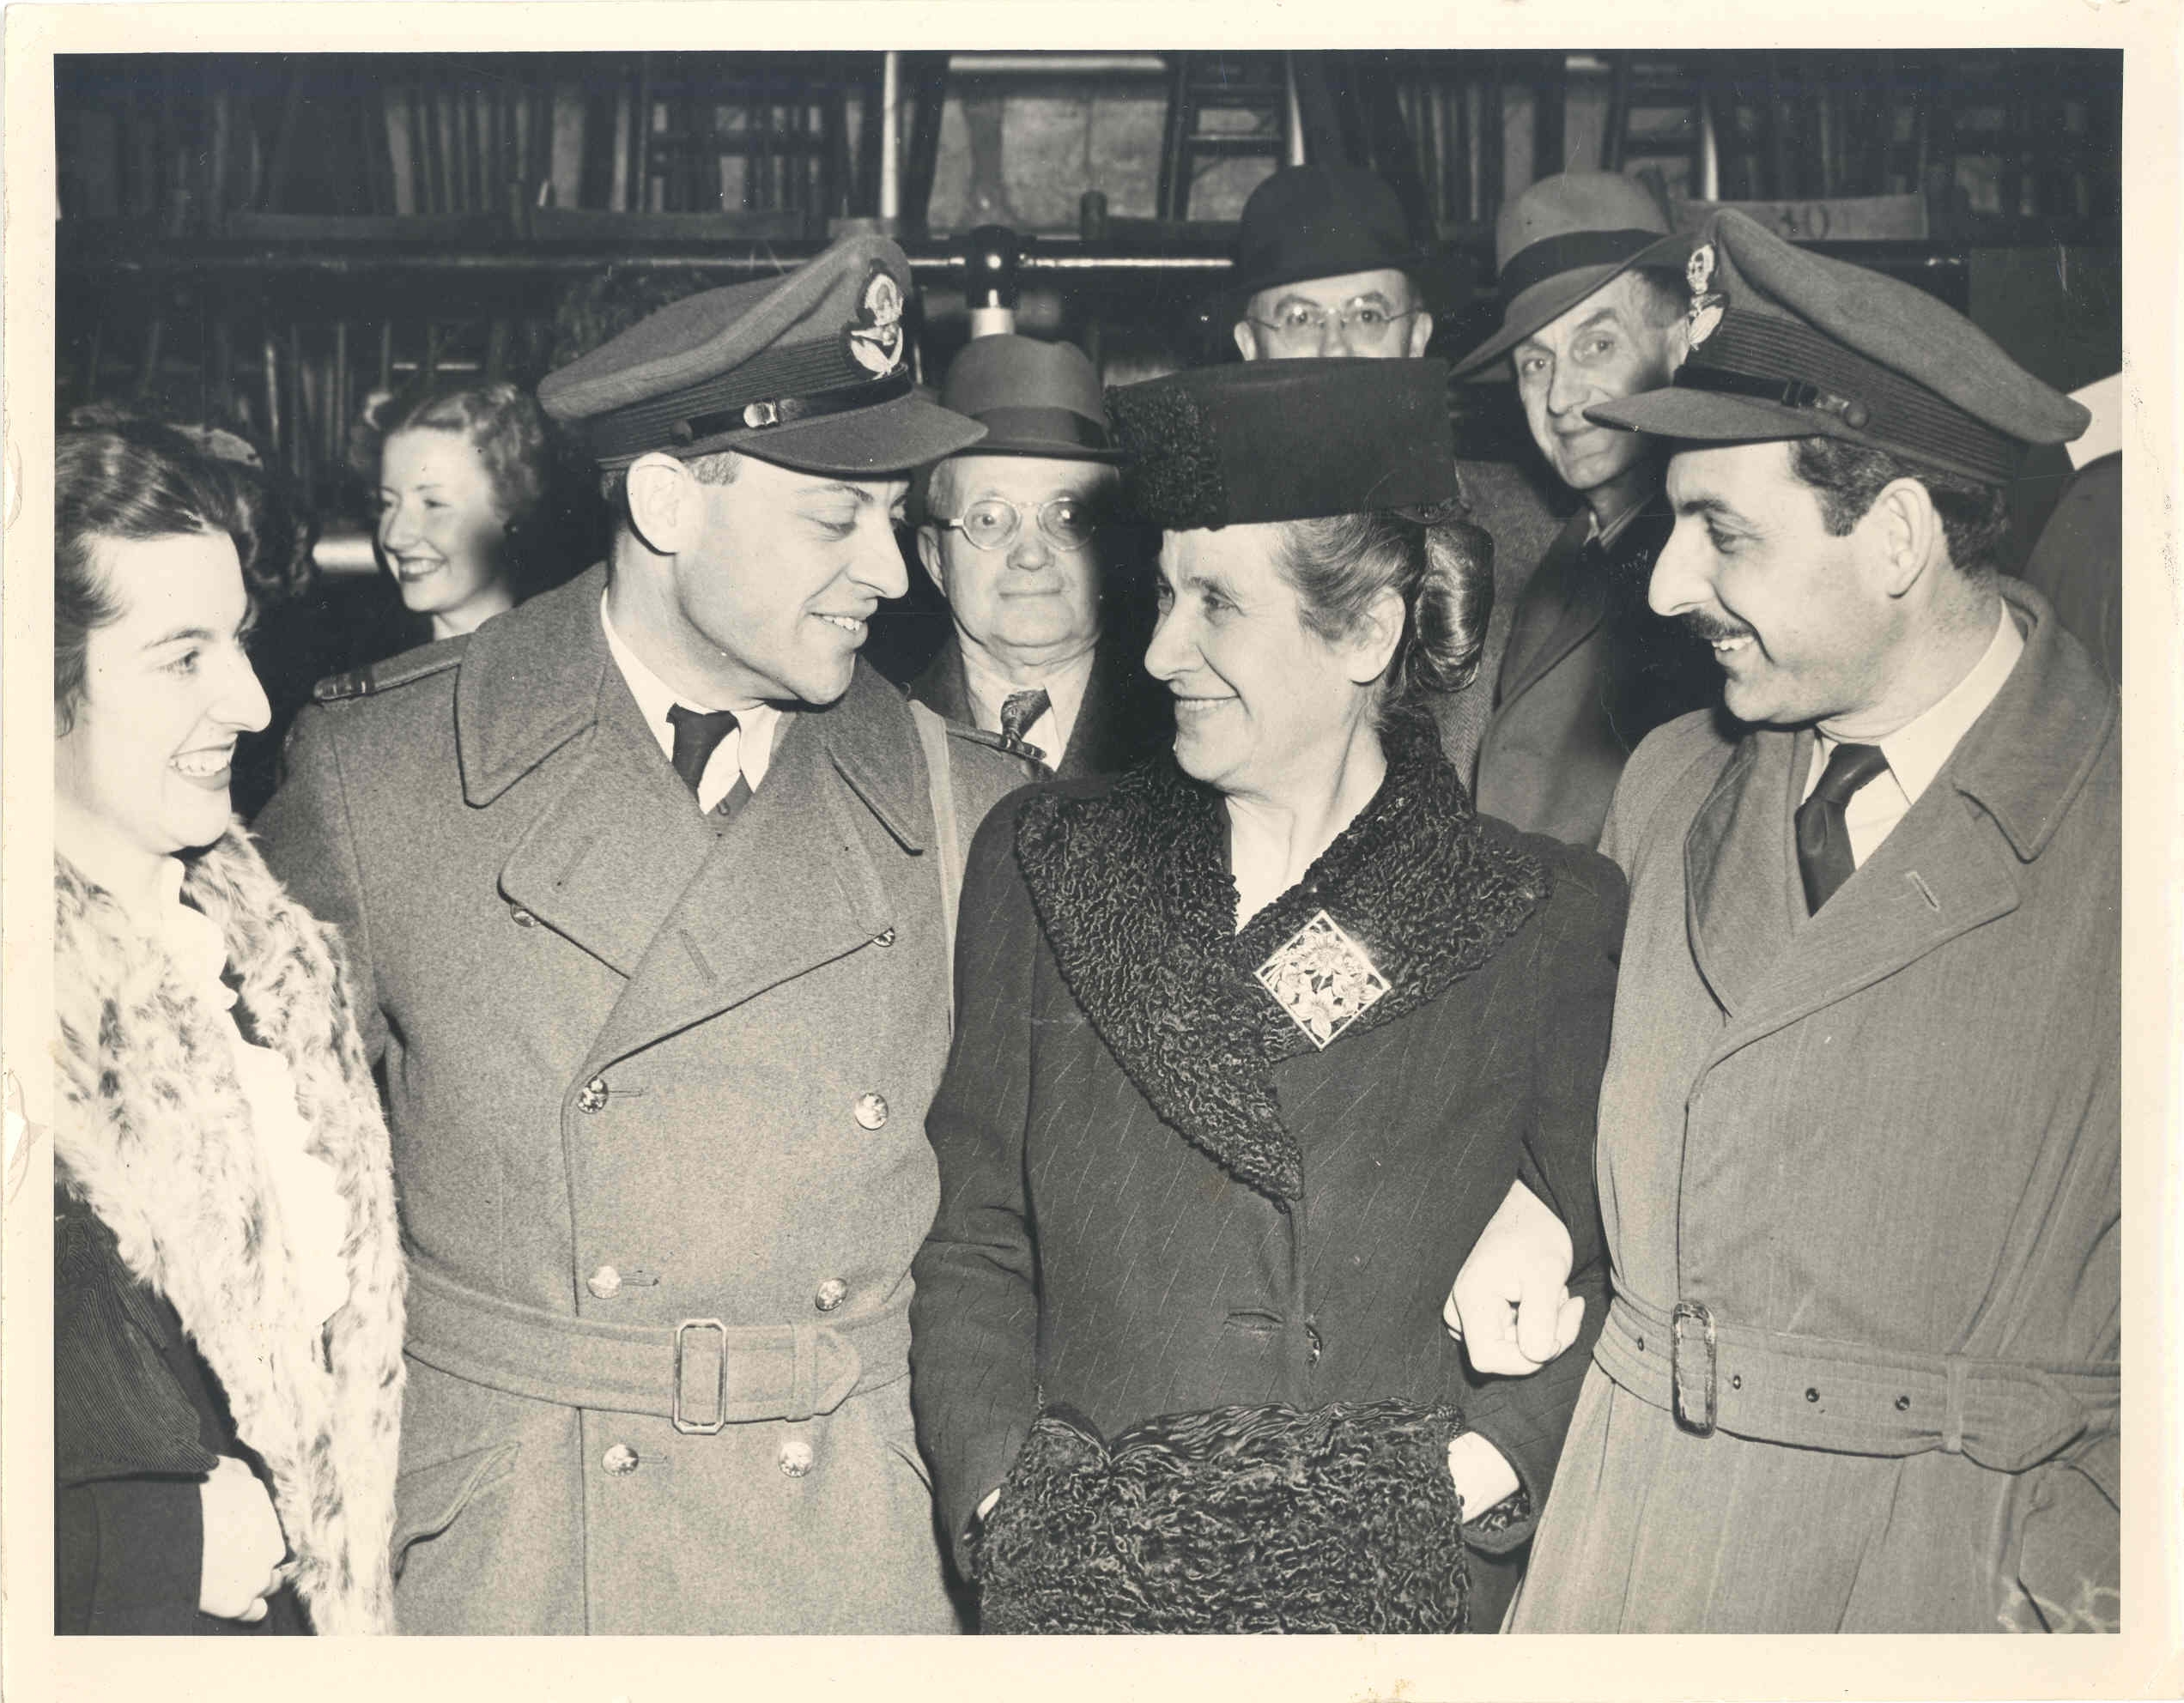 Ida Siegel with her children Rivka (far left) and returning Canadian servicemen Avrom (left) and David (right), Toronto, Dec. 1945. Ontario Jewish Archives, Blankenstein Family Heritage Centre, fonds 15, file 37, item 9.